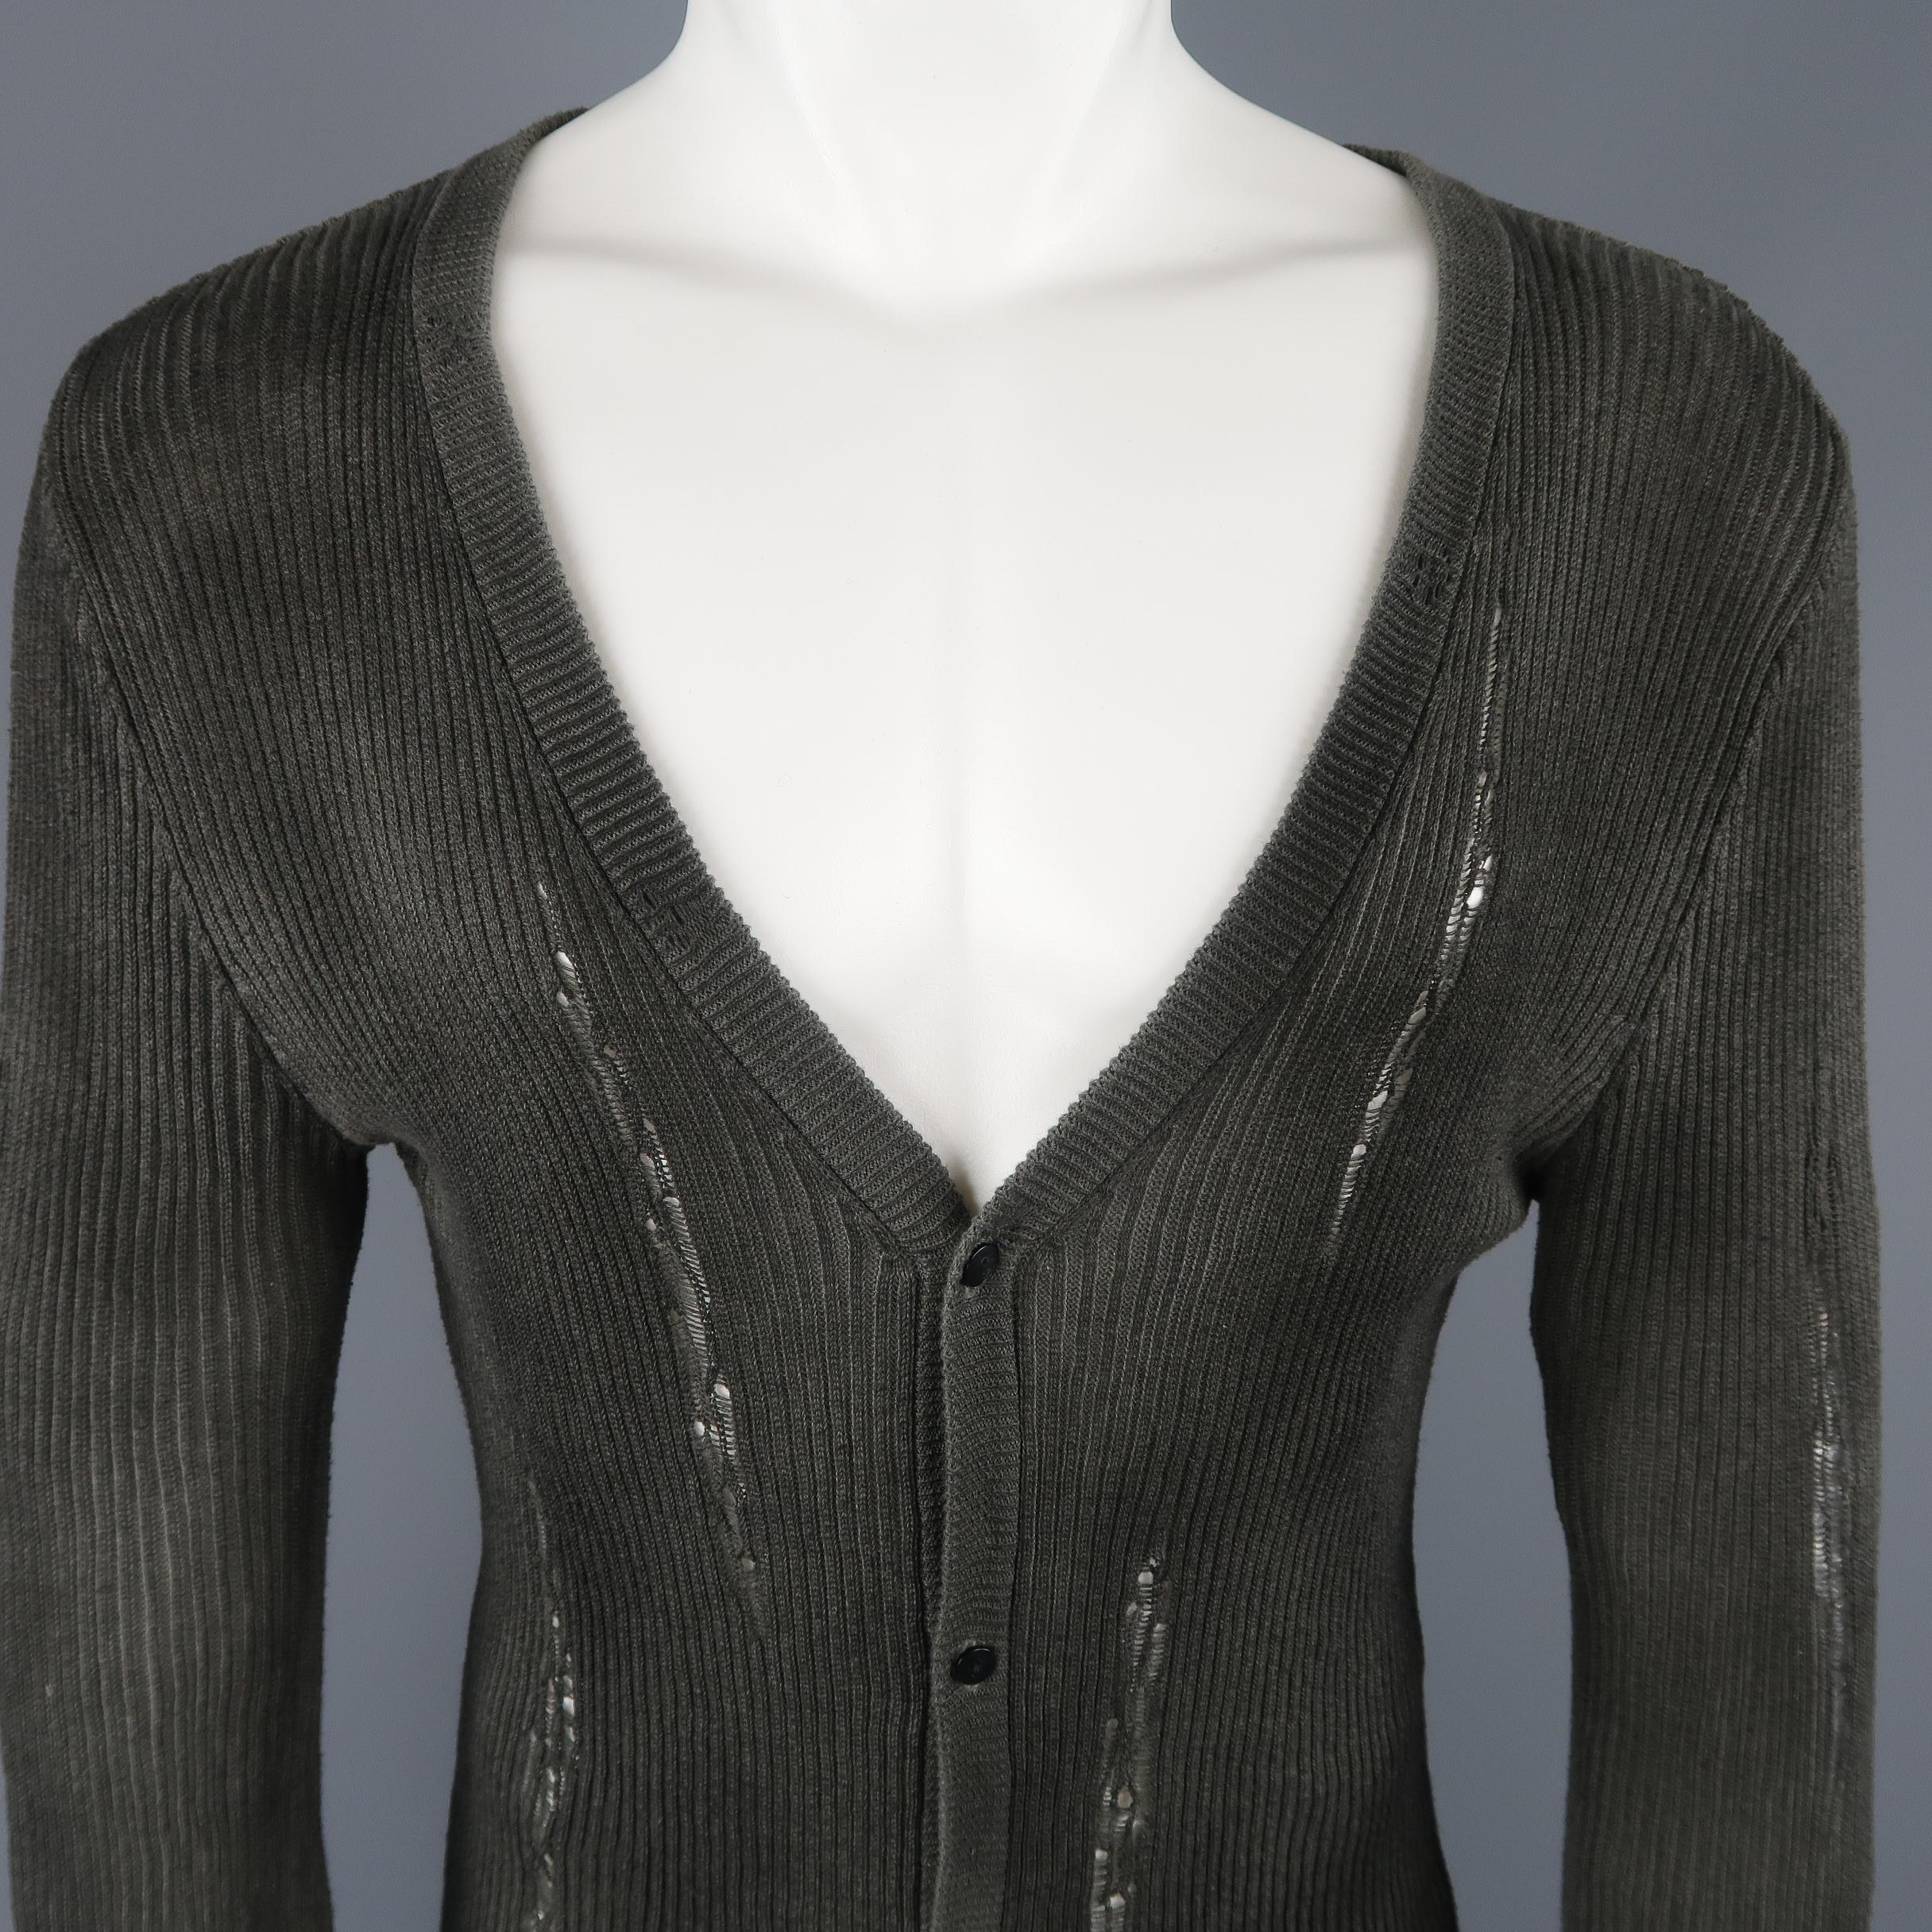 SKINGRAFT biker vest comes in gray washed denim with a pointed lapel collar, asymmetrical closure, quilted shoulders, and flap pockets with silver tone buttons.
 
Good Pre-Owned Condition.
Marked: S
 
Measurements:
 
Shoulder: 18 in.
Chest: 42